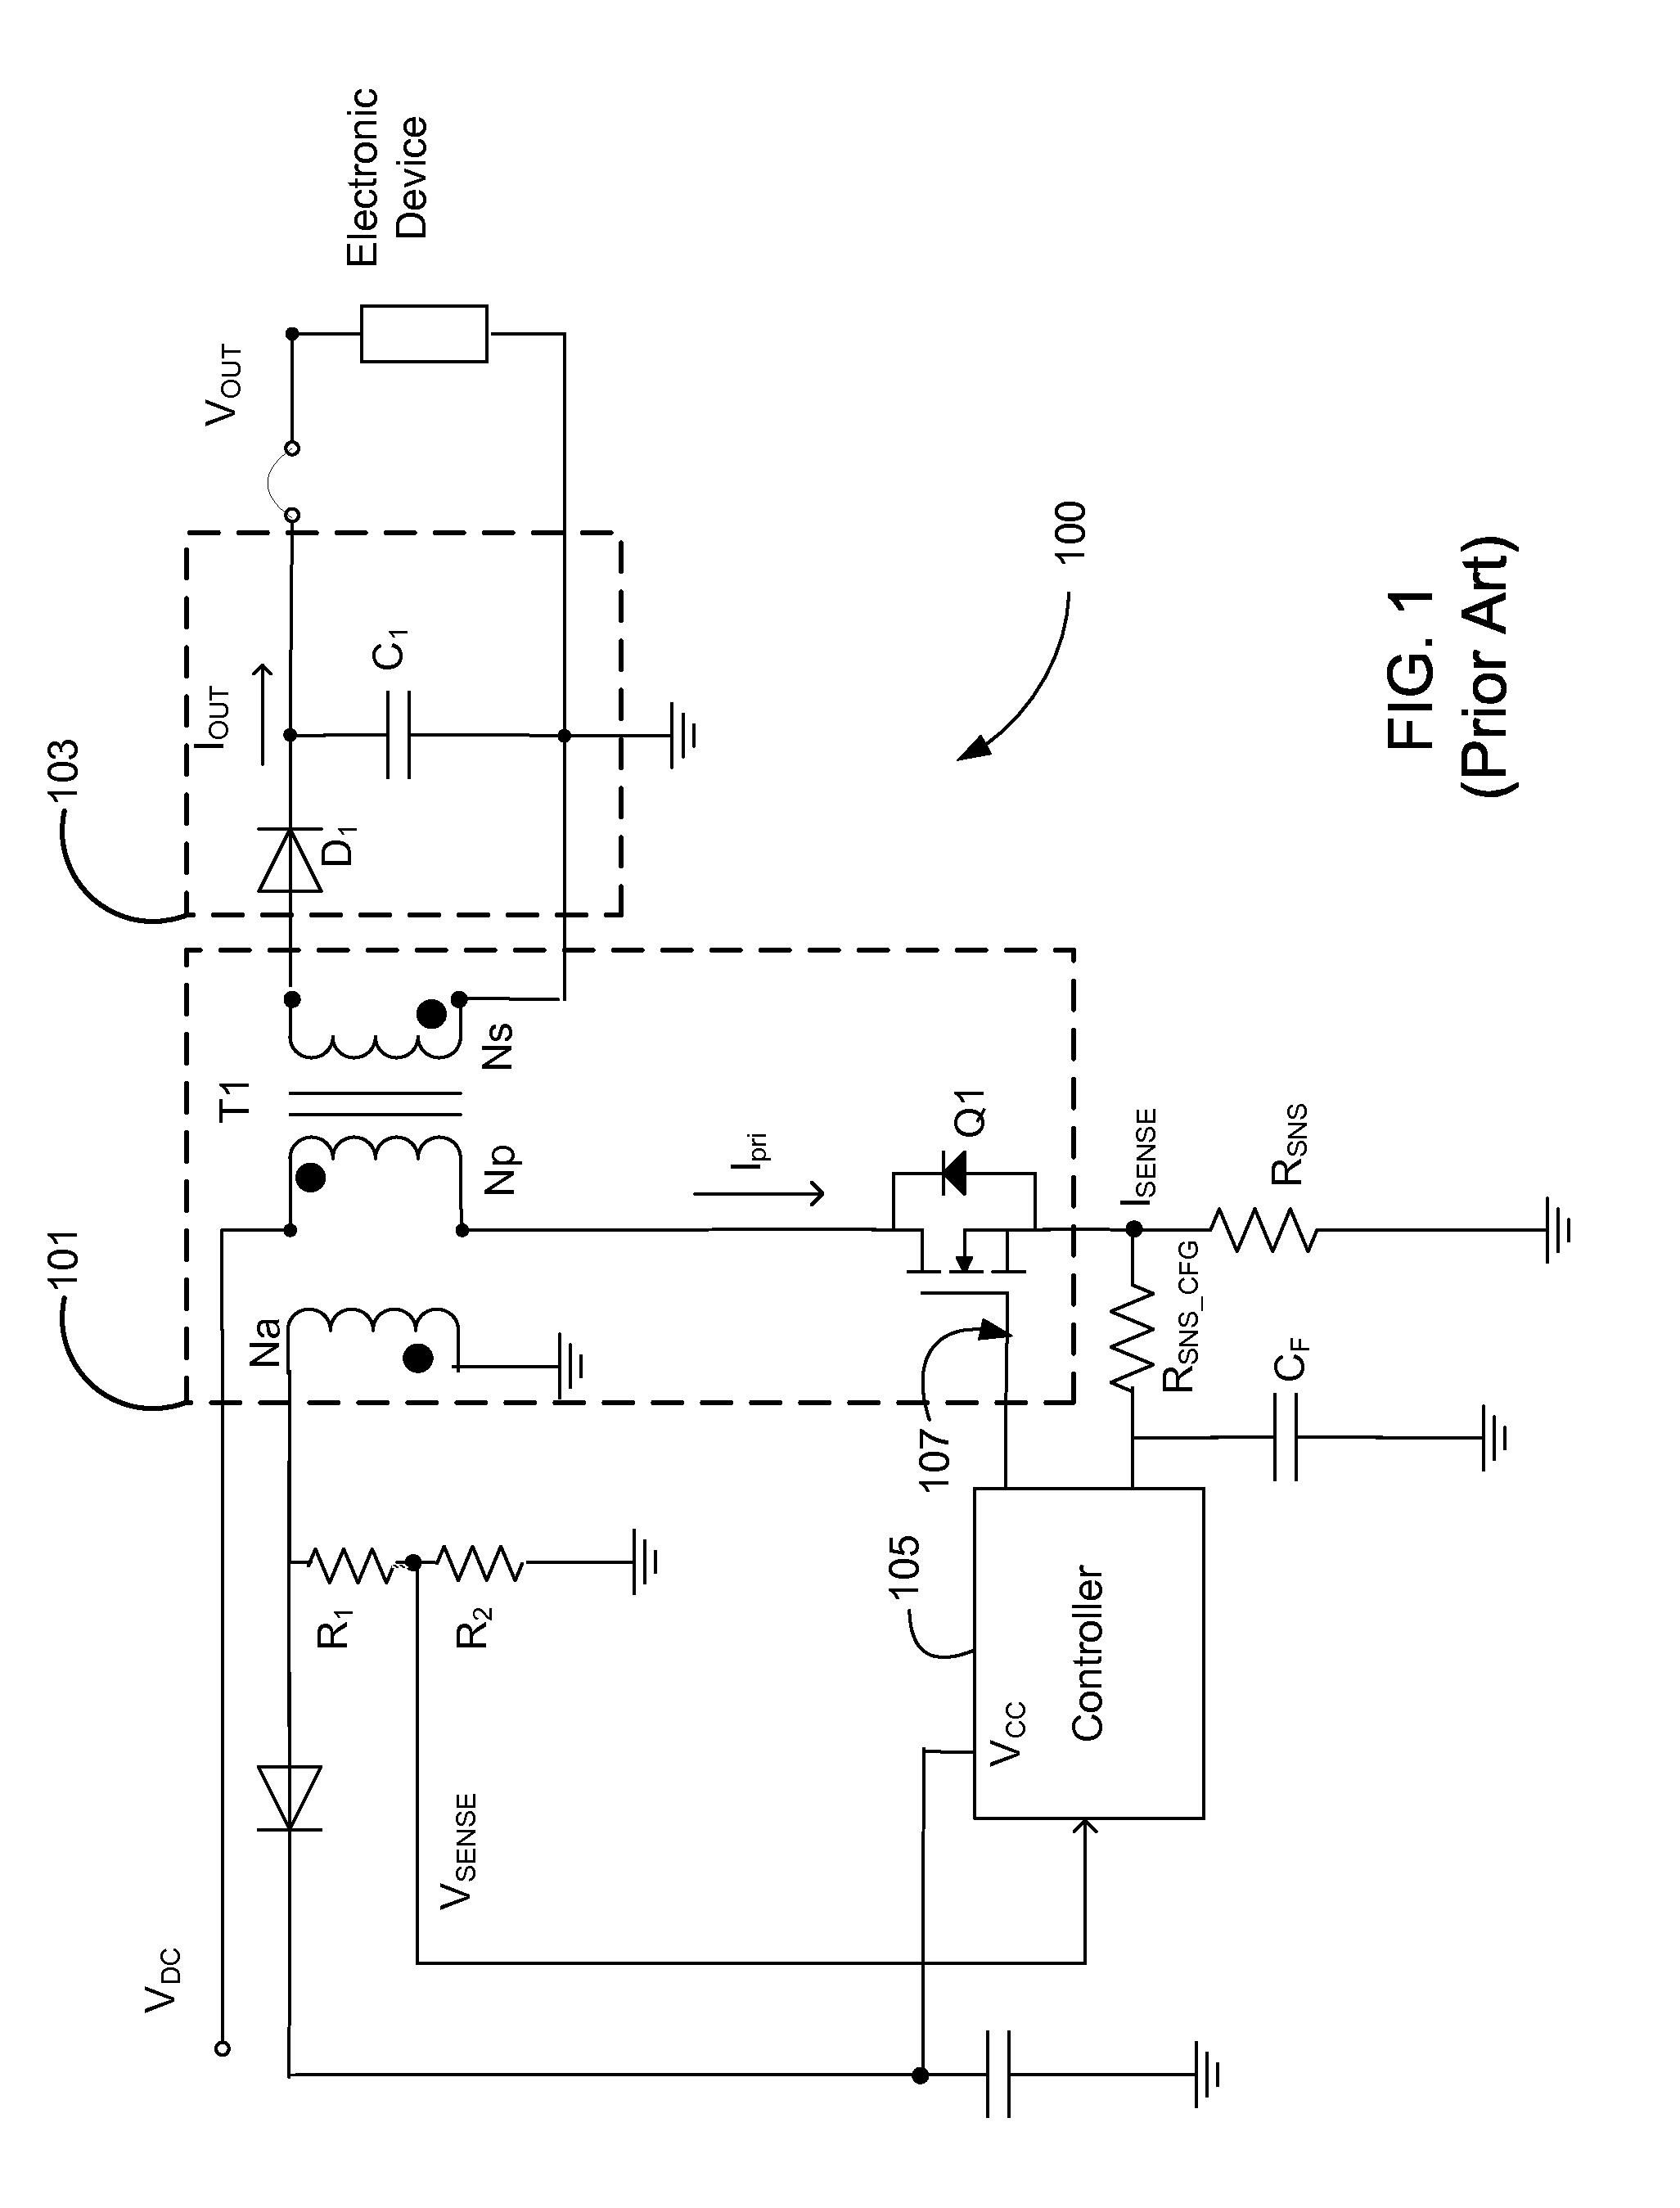 Adaptive synchronous rectifier control